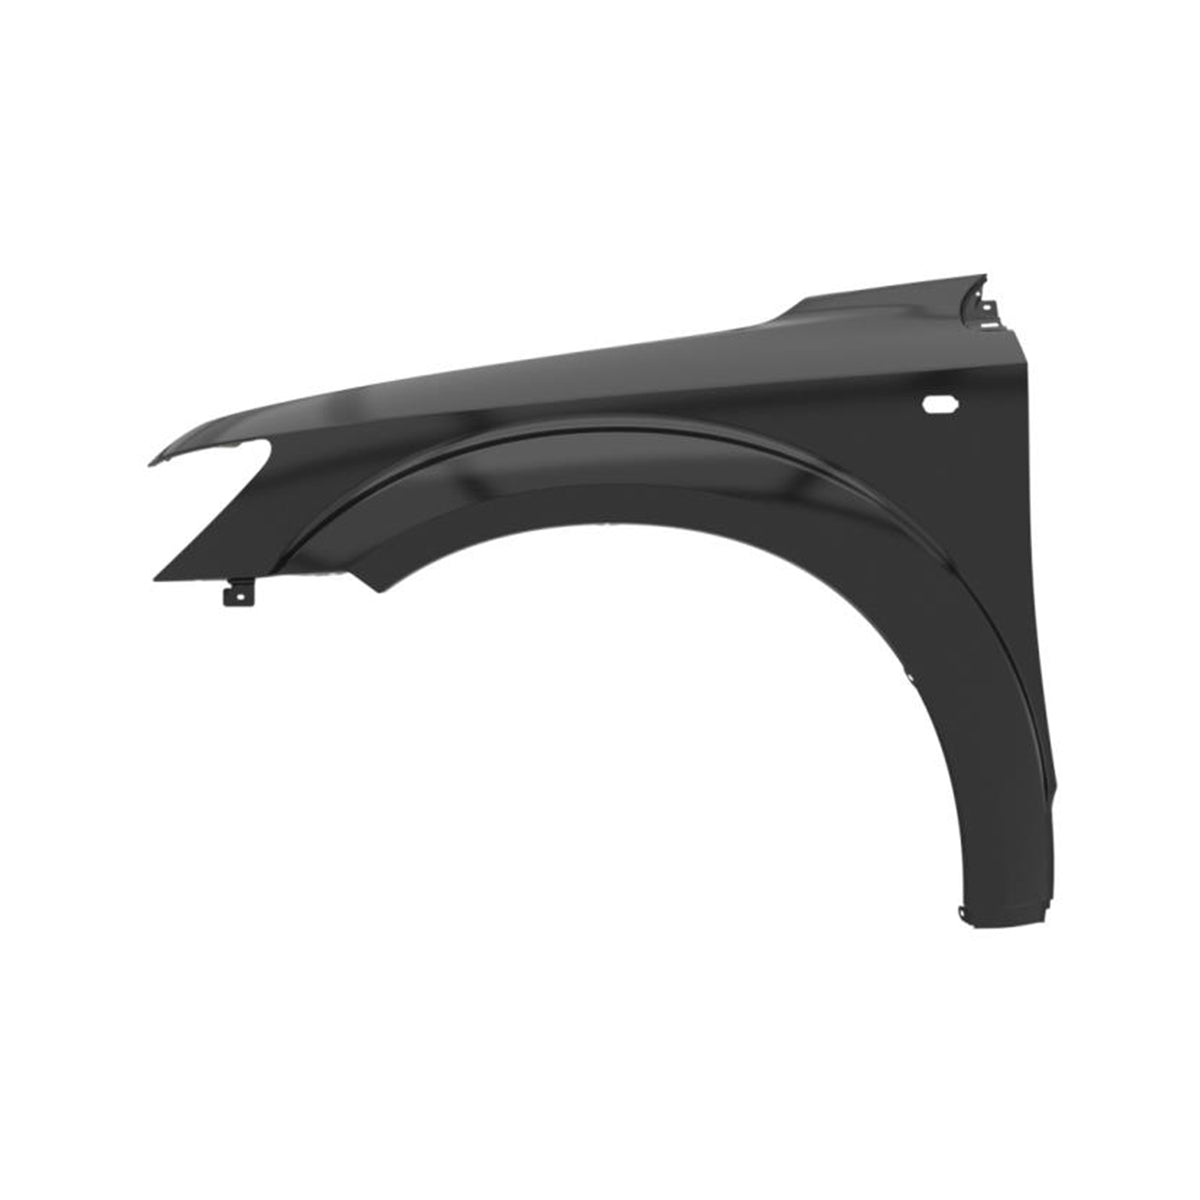 Replacement FRONT FENDER LH, 2009-2020 Dodge Journey, 5076727AD, (Steel)